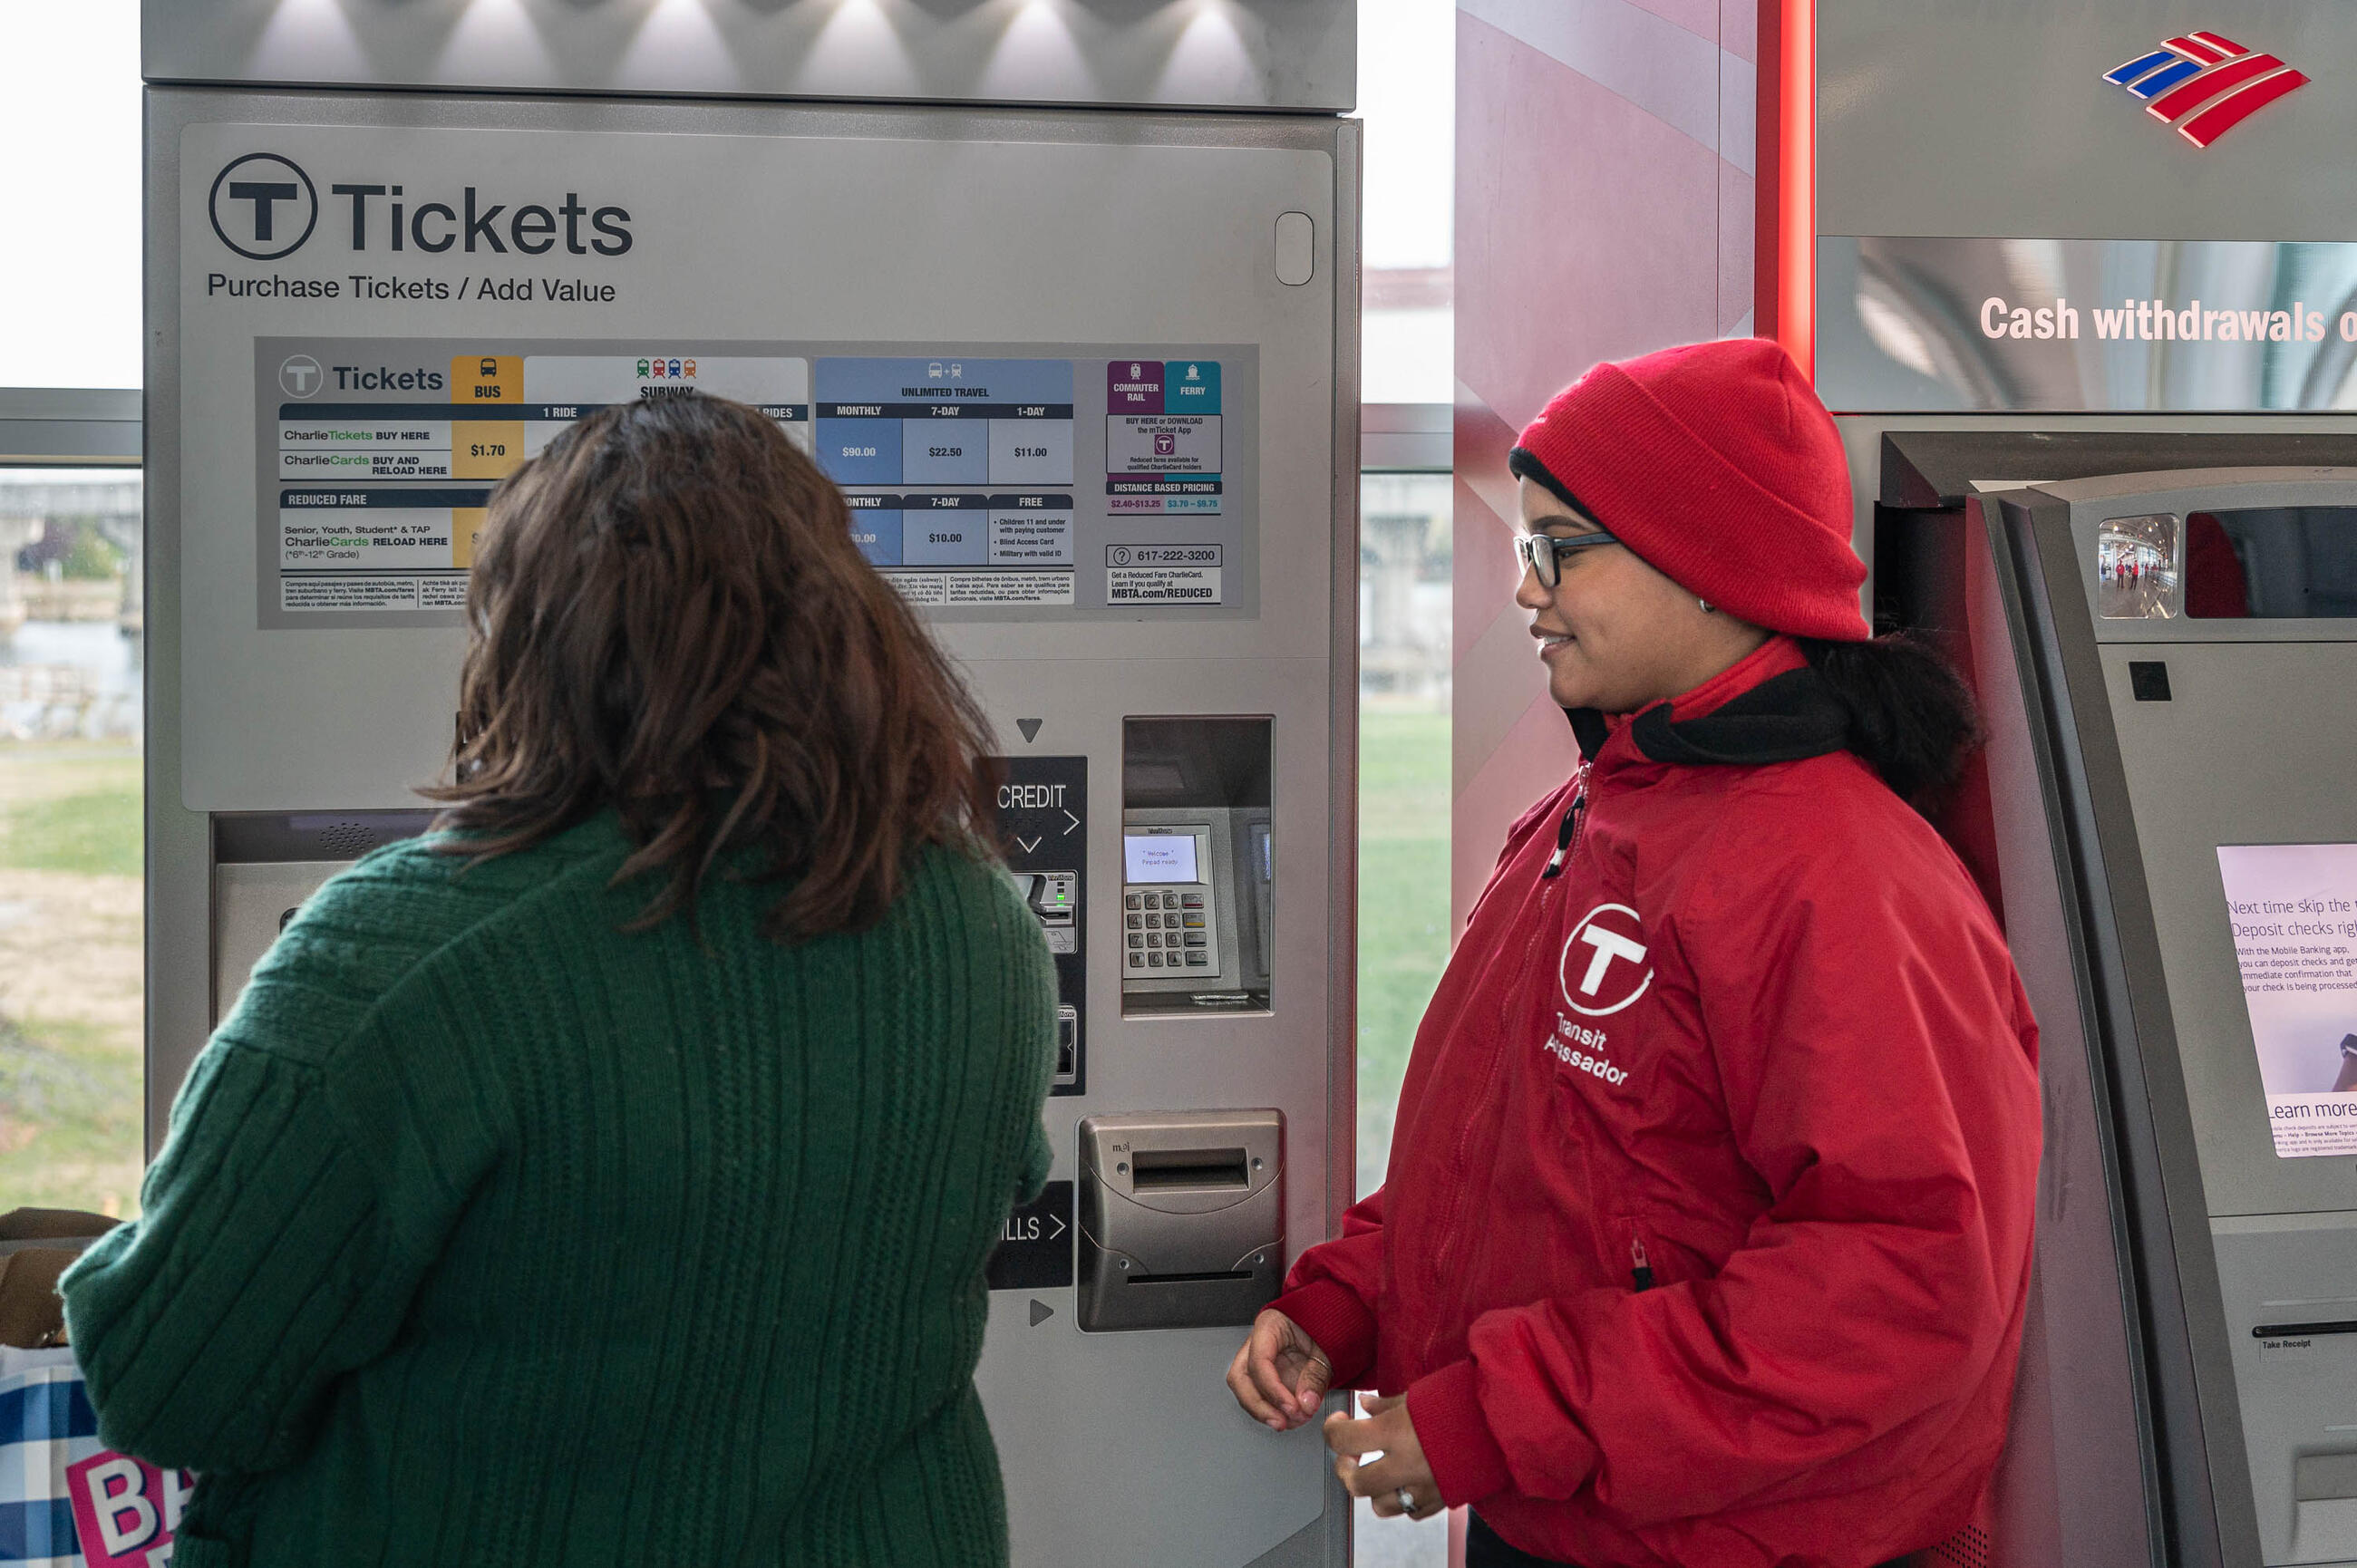 Transit ambassador in a red jacket helping rider at a fare vending machine at Assembly station